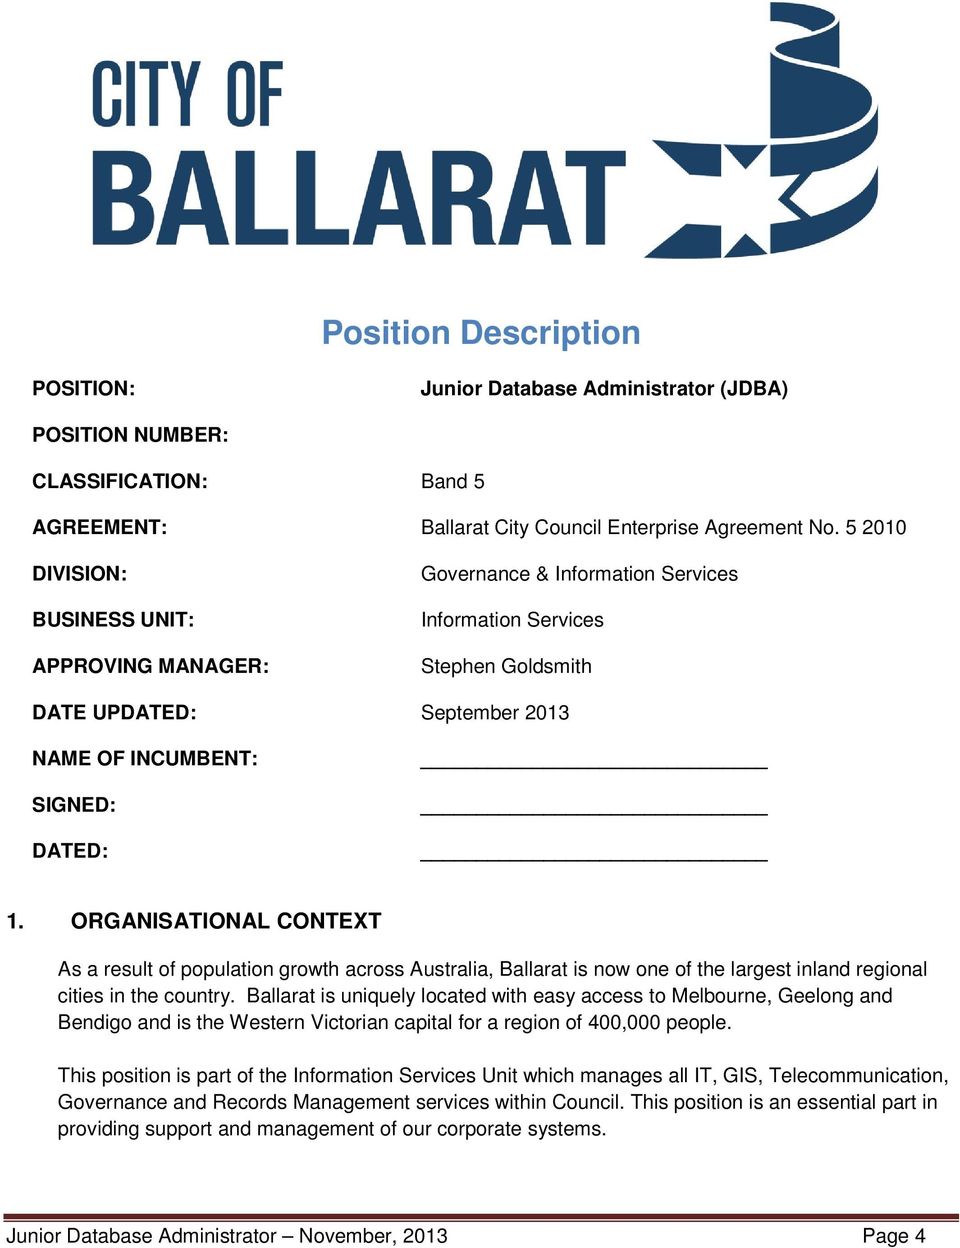 ORGANISATIONAL CONTEXT As a result of population growth across Australia, Ballarat is now one of the largest inland regional cities in the country.